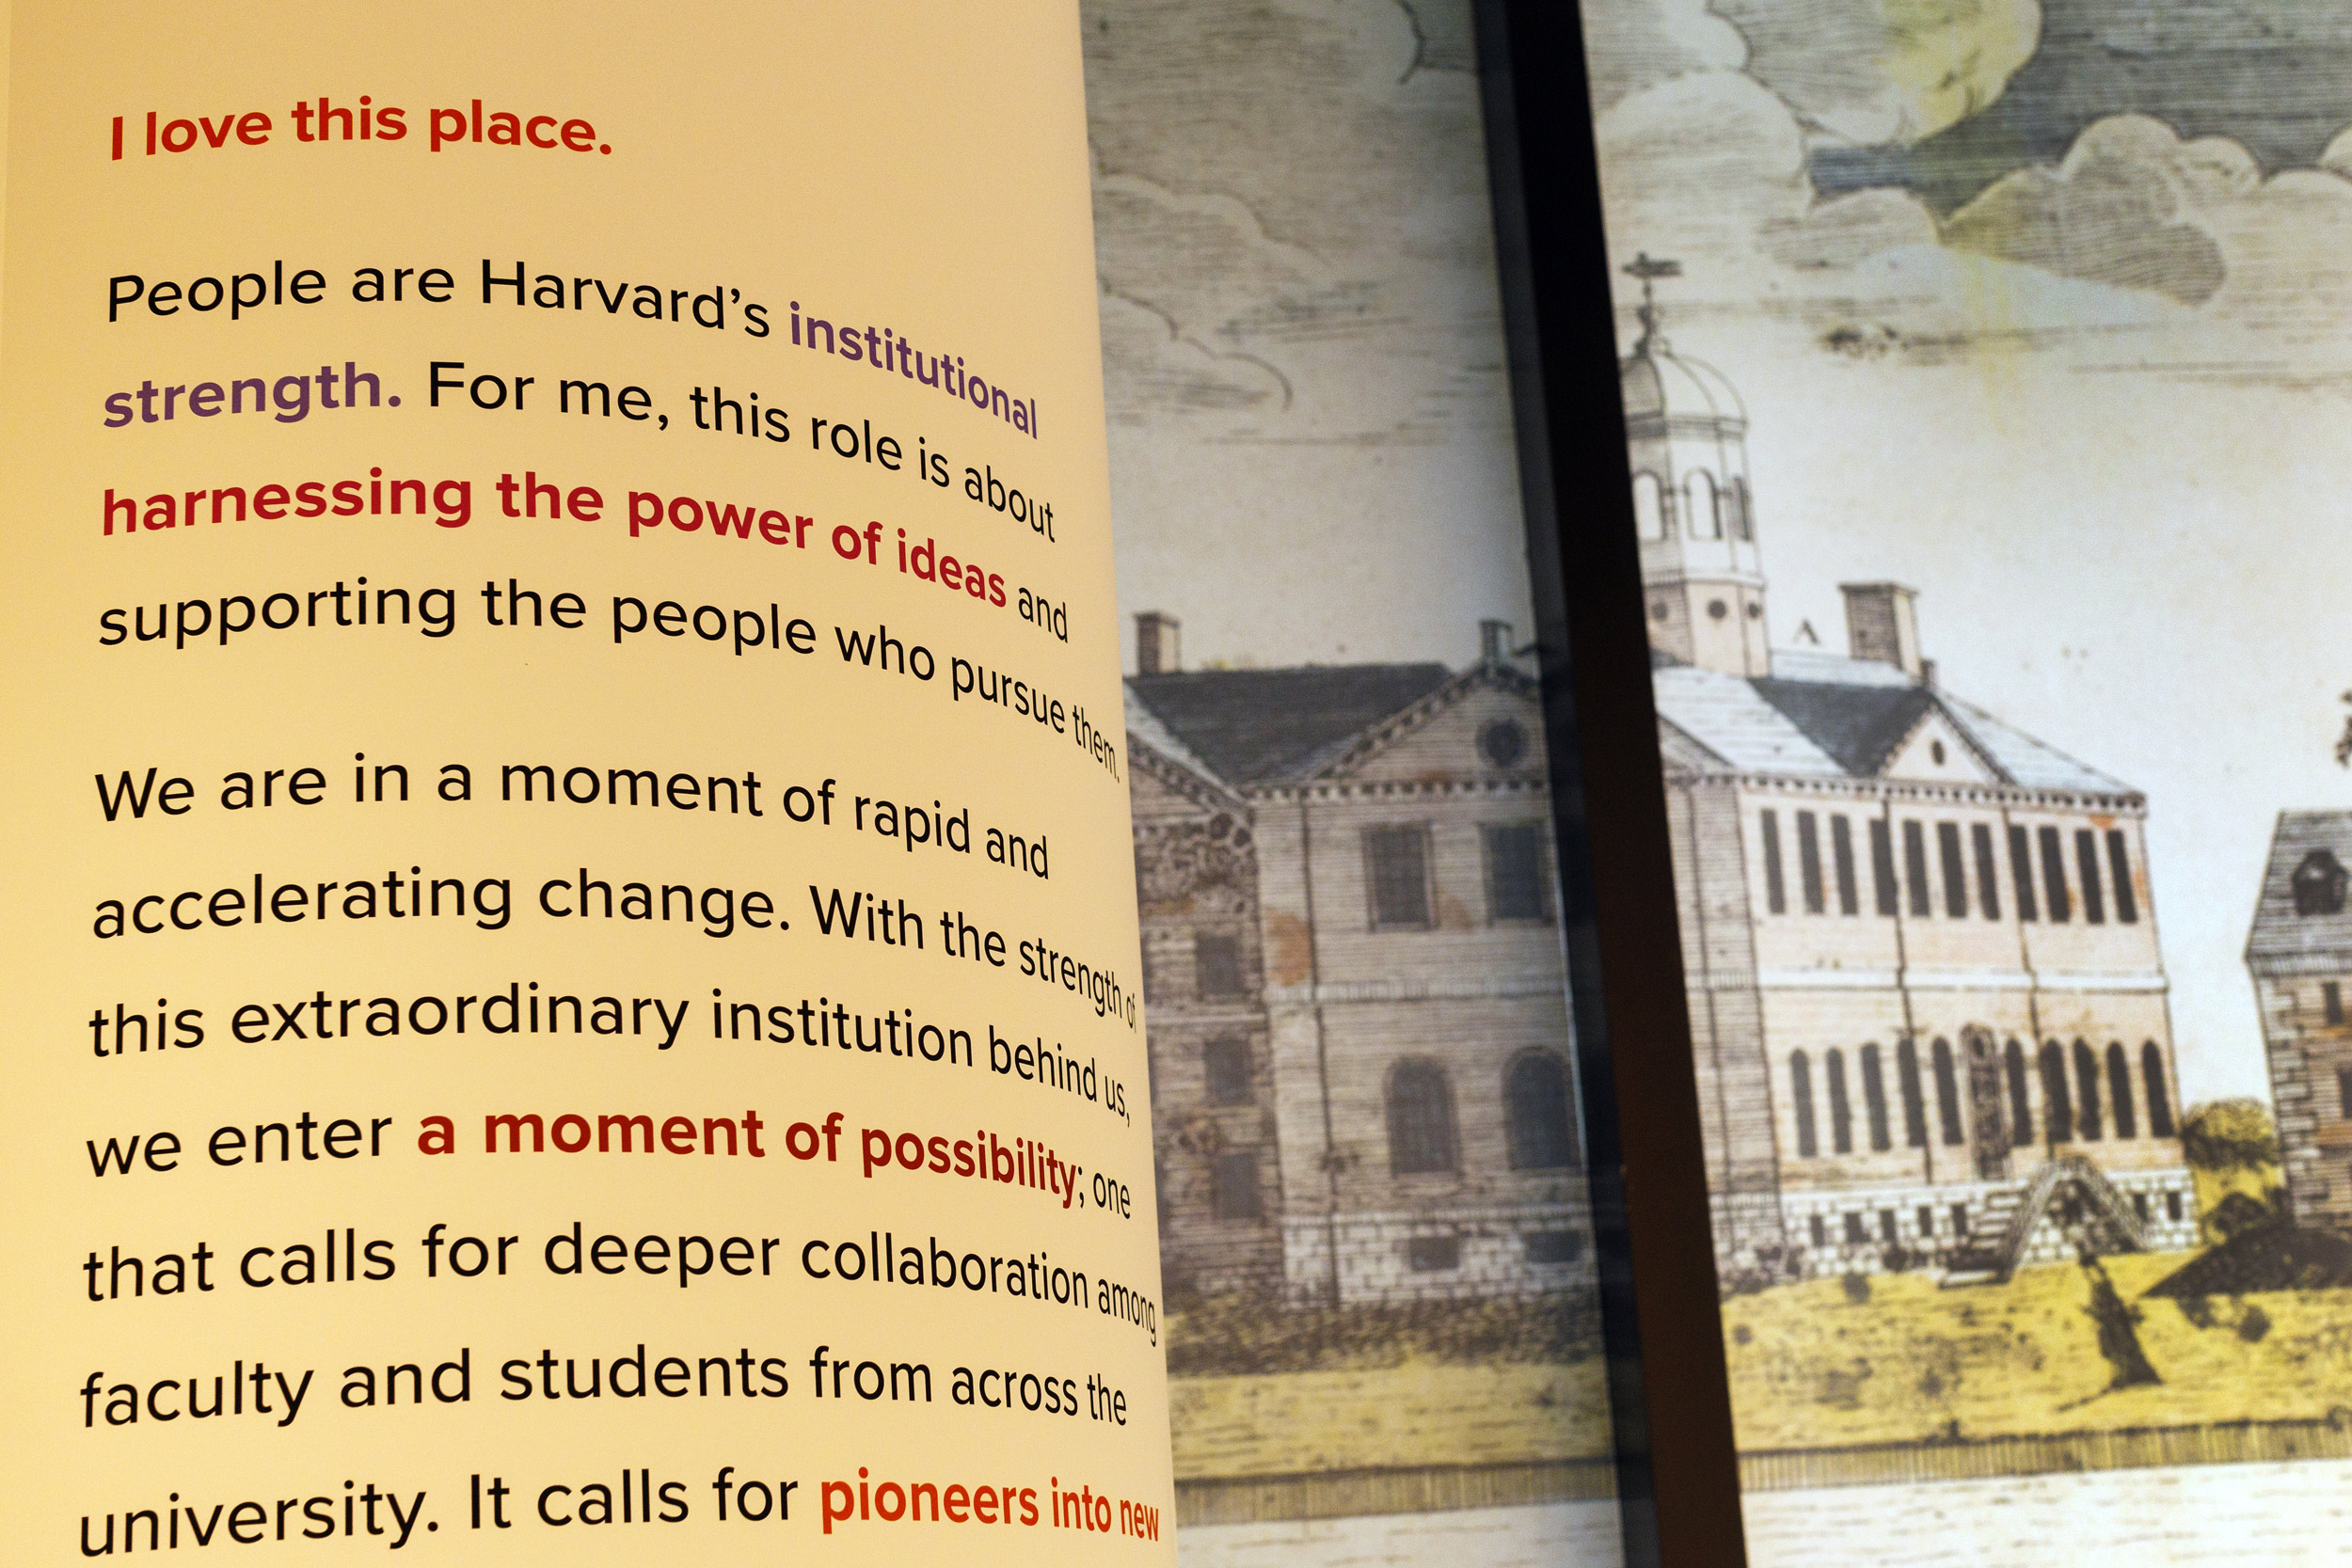 Large text from Claudine Gay speech displayed alongside historical illustrations of Harvard's campus.